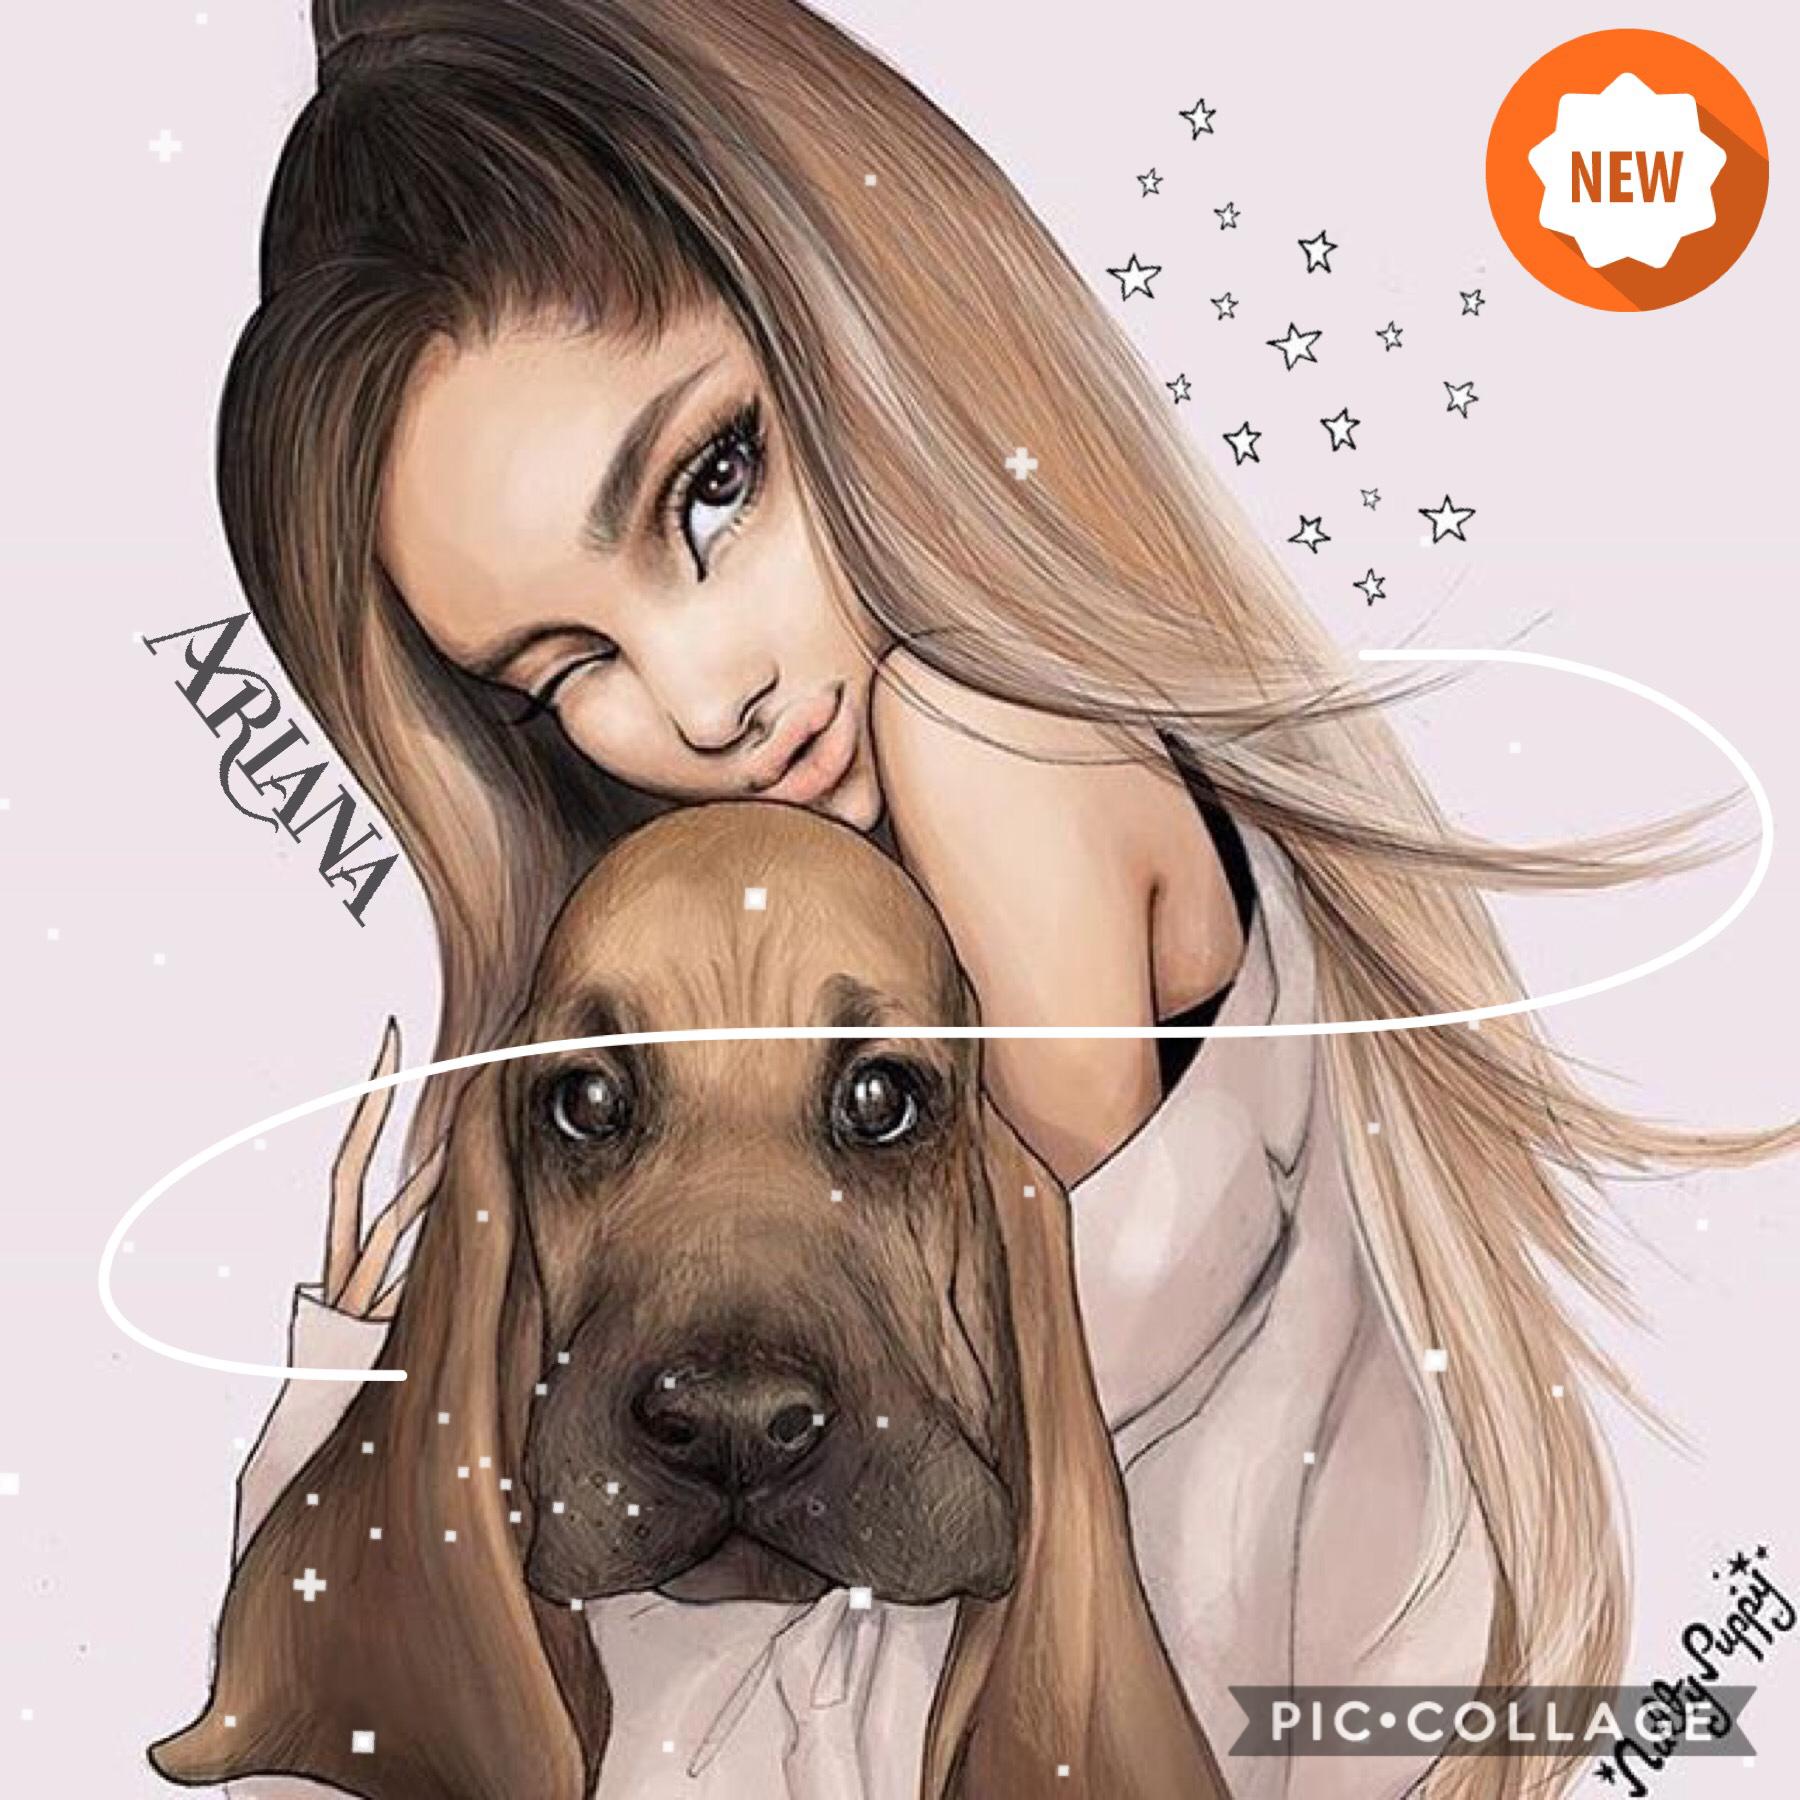 Tap
New theme❤️
Anyone wanna collab for Ariana?
